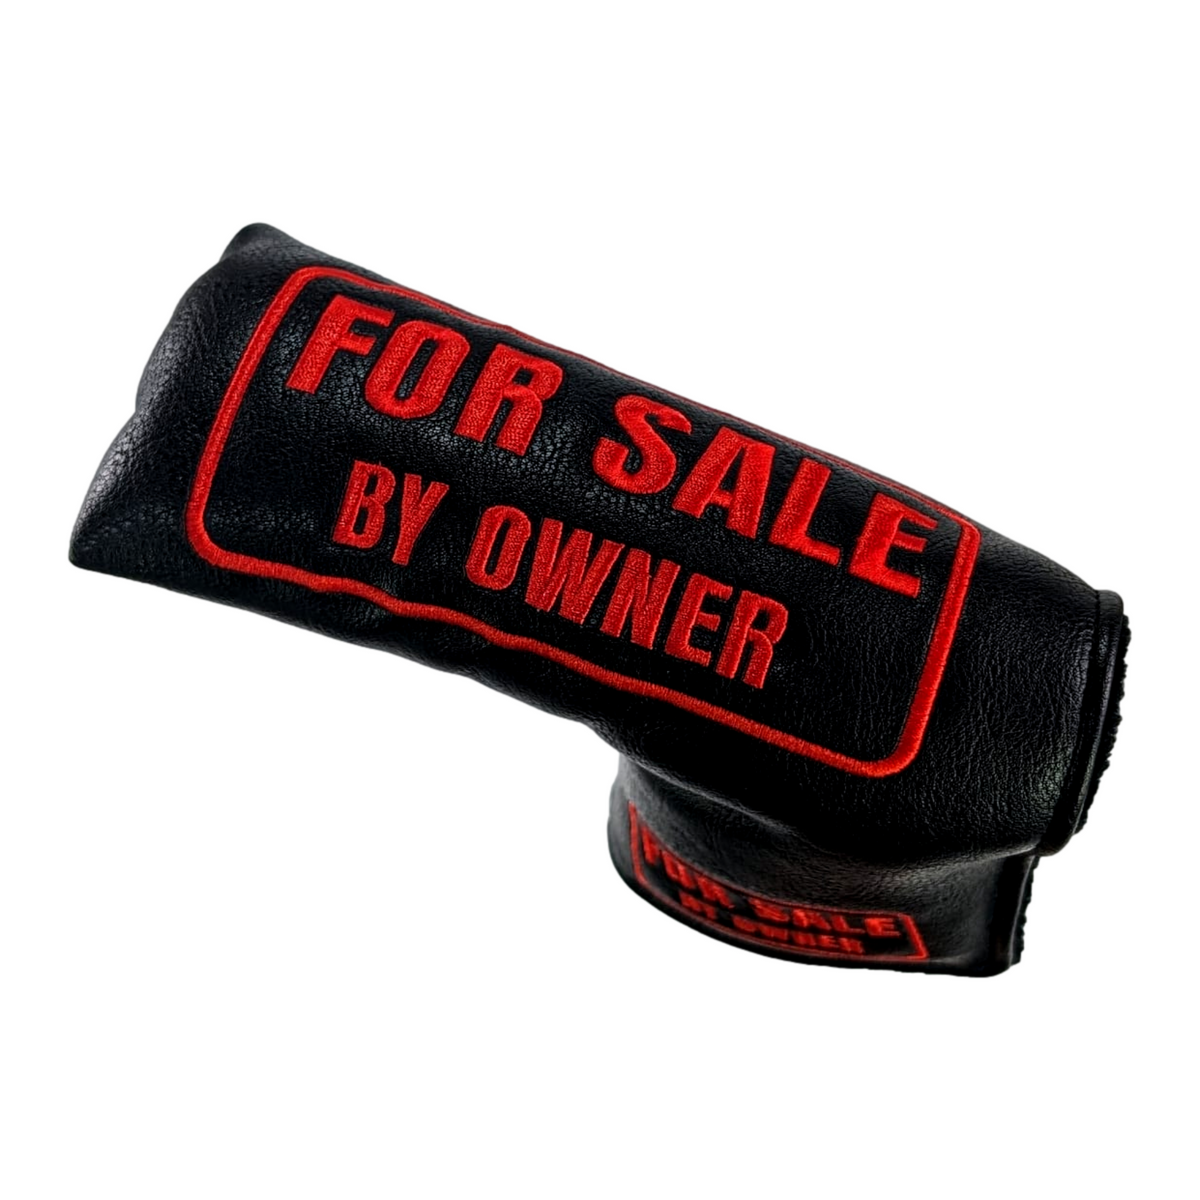 For Sale by Owner - BLADE Putter Headcover